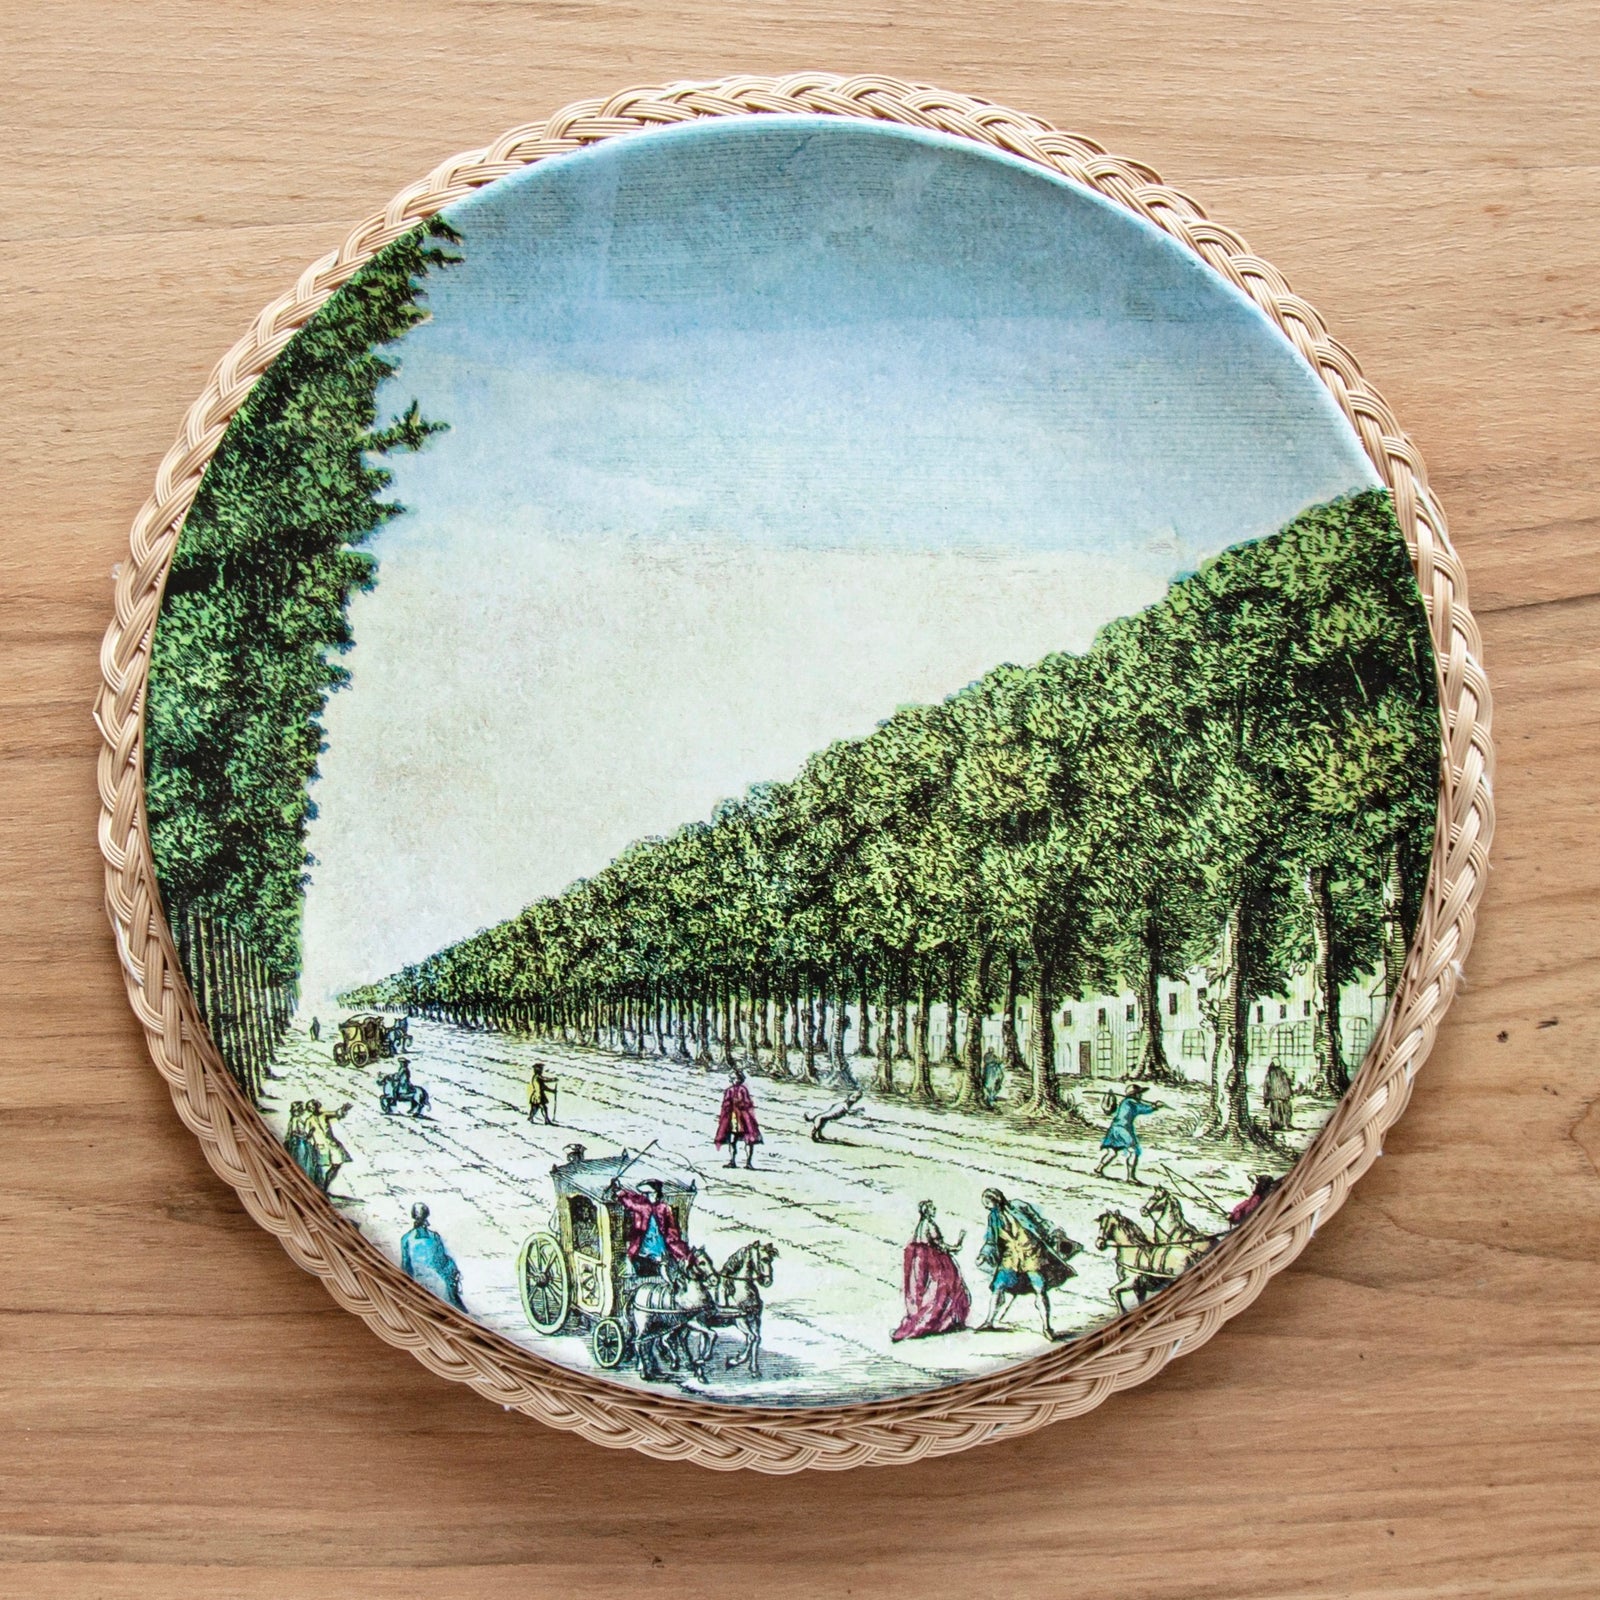 Vauxhall Gardens Dinner Plate with trees on Rattan Placemat